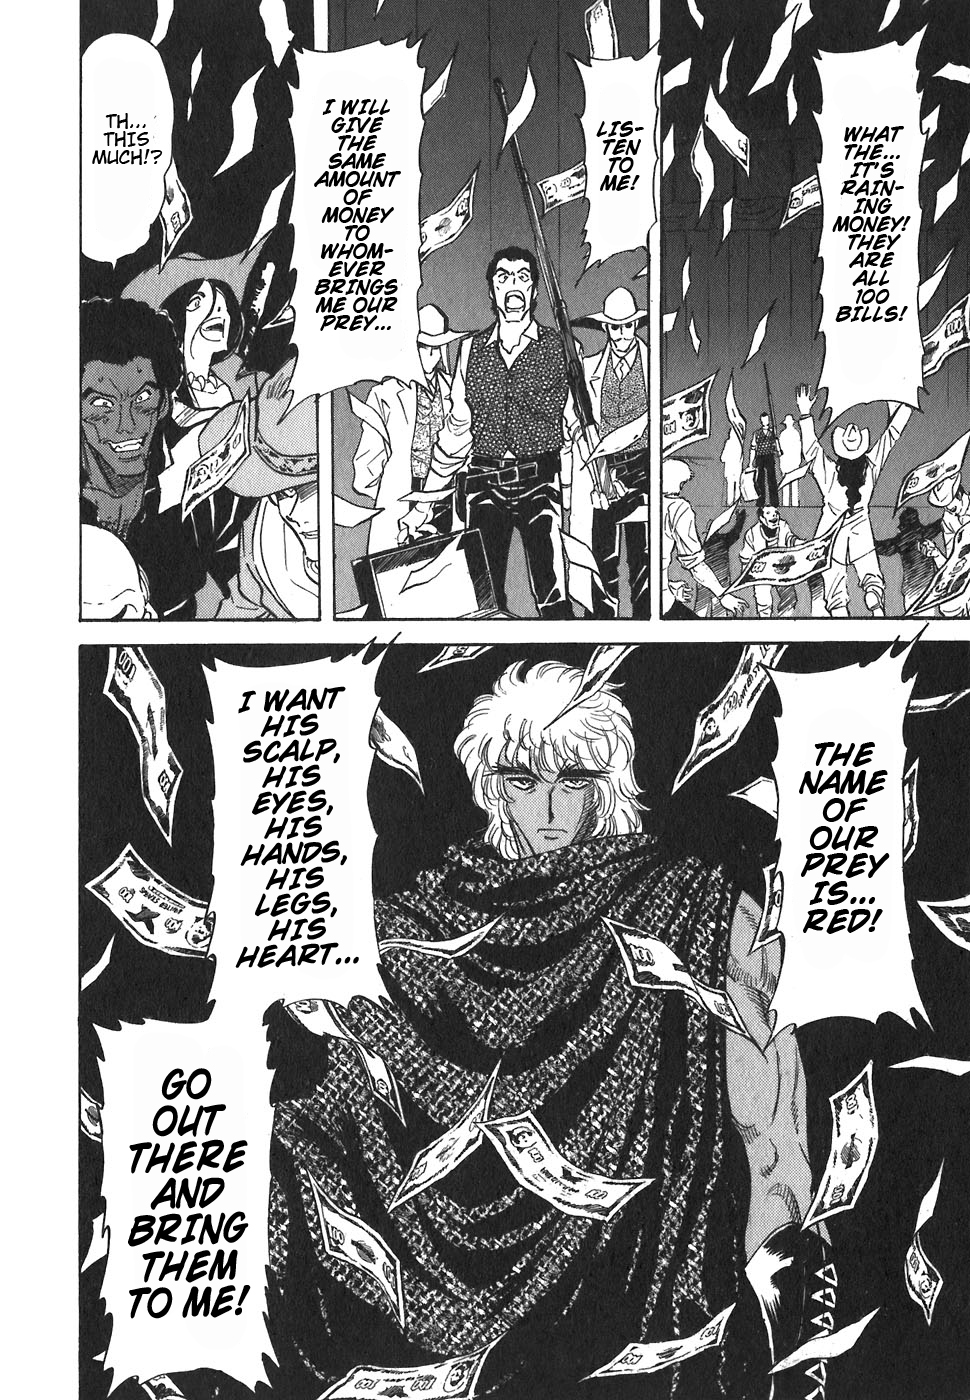 RED: Living on the Edge Vol. 10 Ch. 72 Death Wish 1